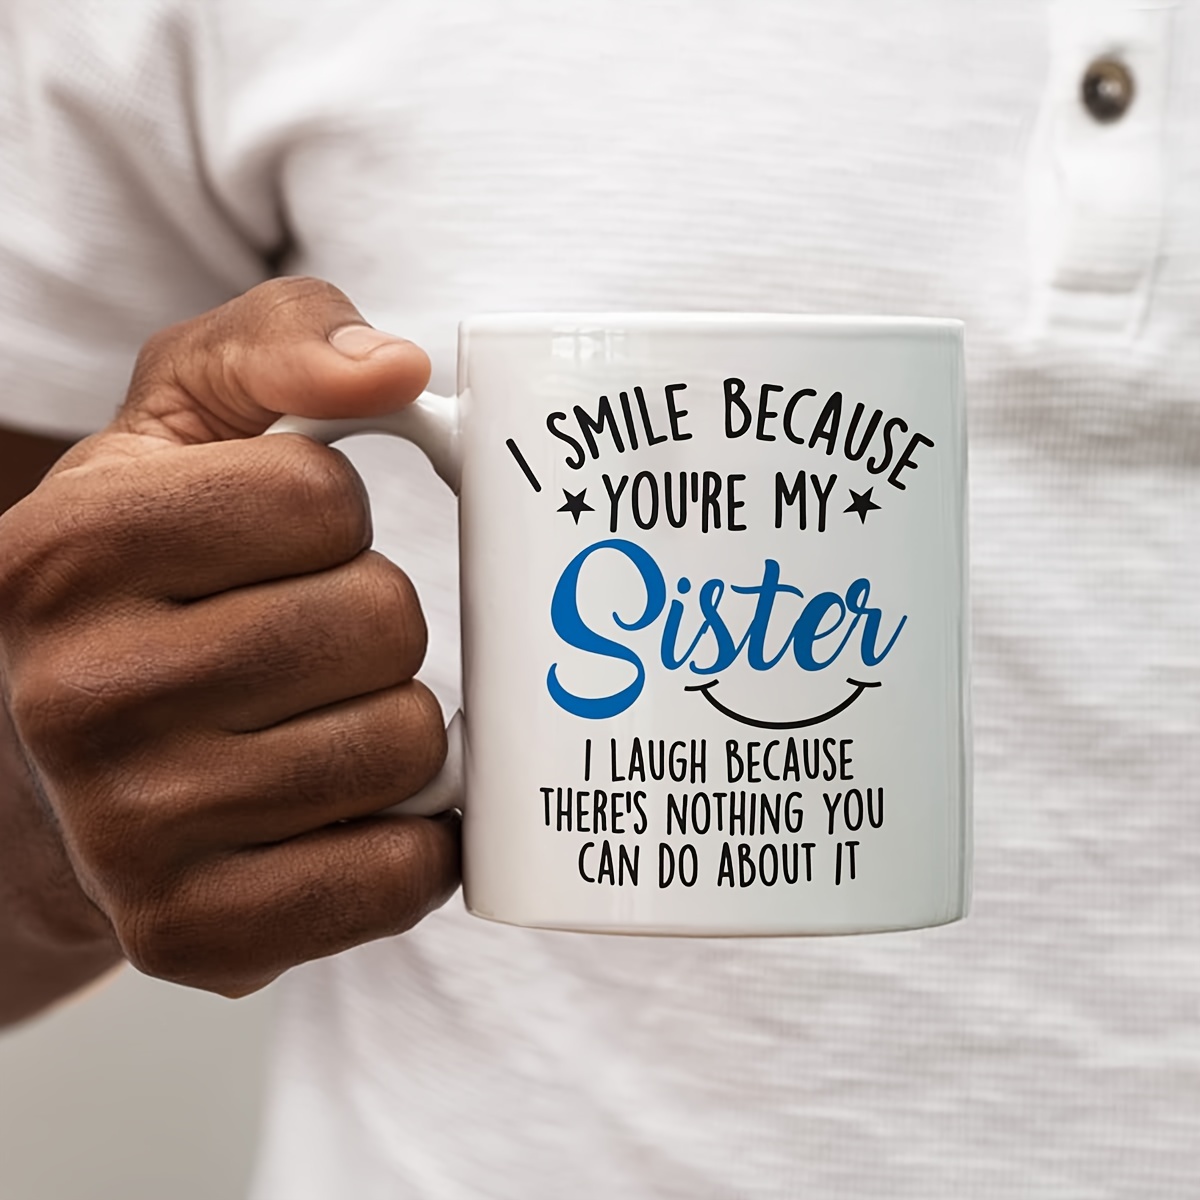 Sister Birthday Gifts from Sister,Brother - Sister Mug from Sister,Friends  - Funny Valentine’s Day Birthday Christmas Gifts for Sisters,Her,Sister in